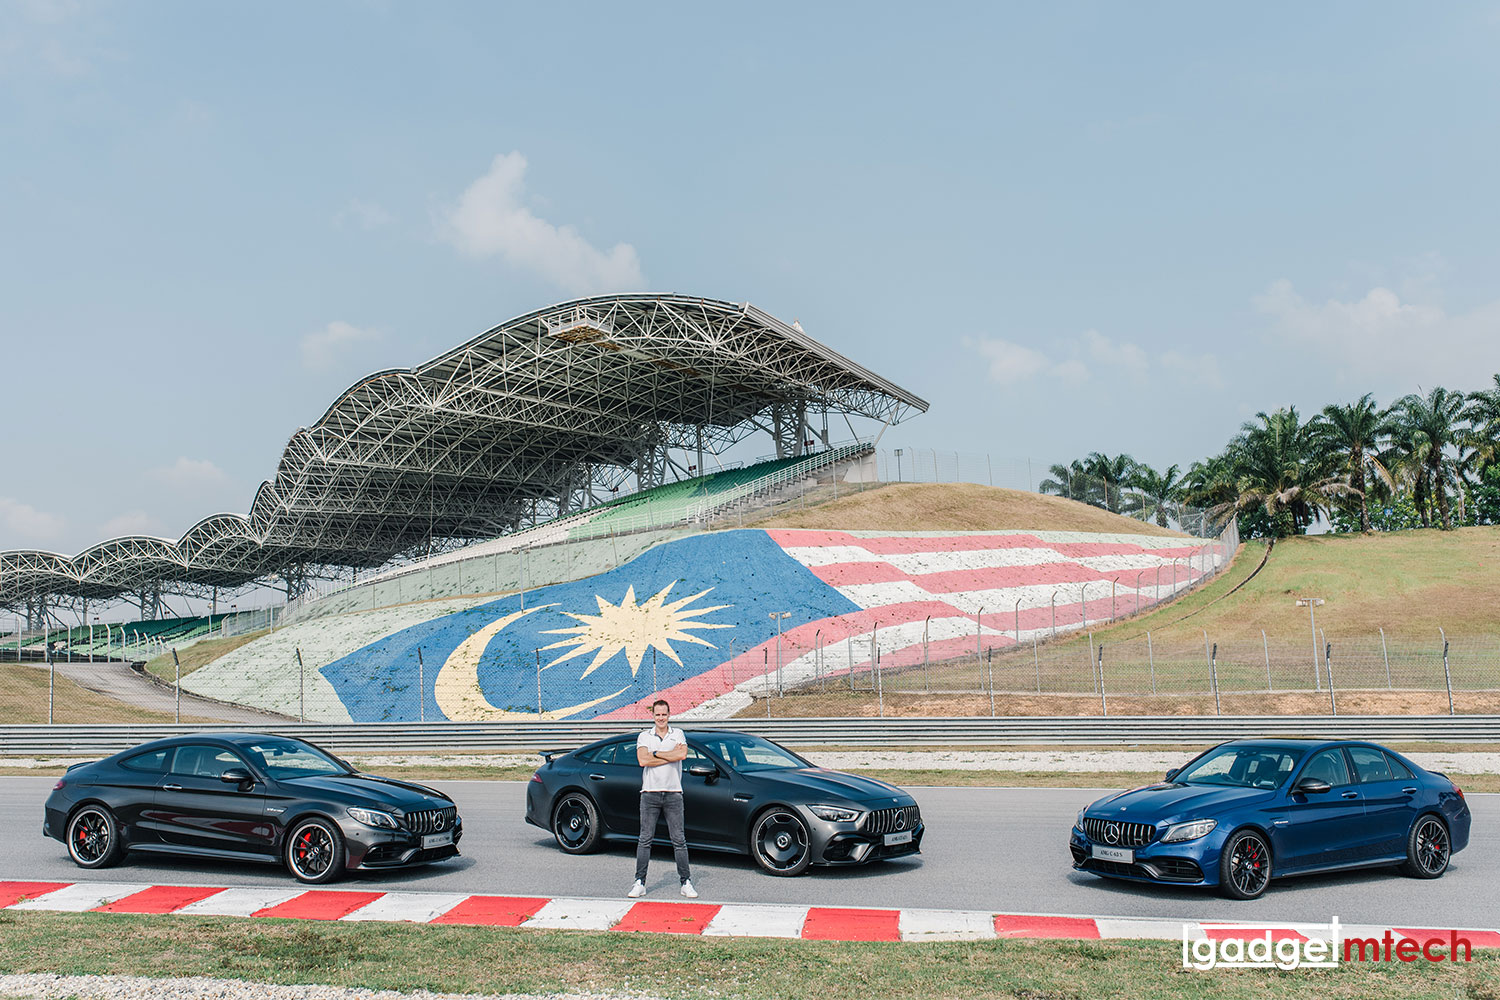 2019 Mercedes-AMG 63 S Officially Launched in Malaysia